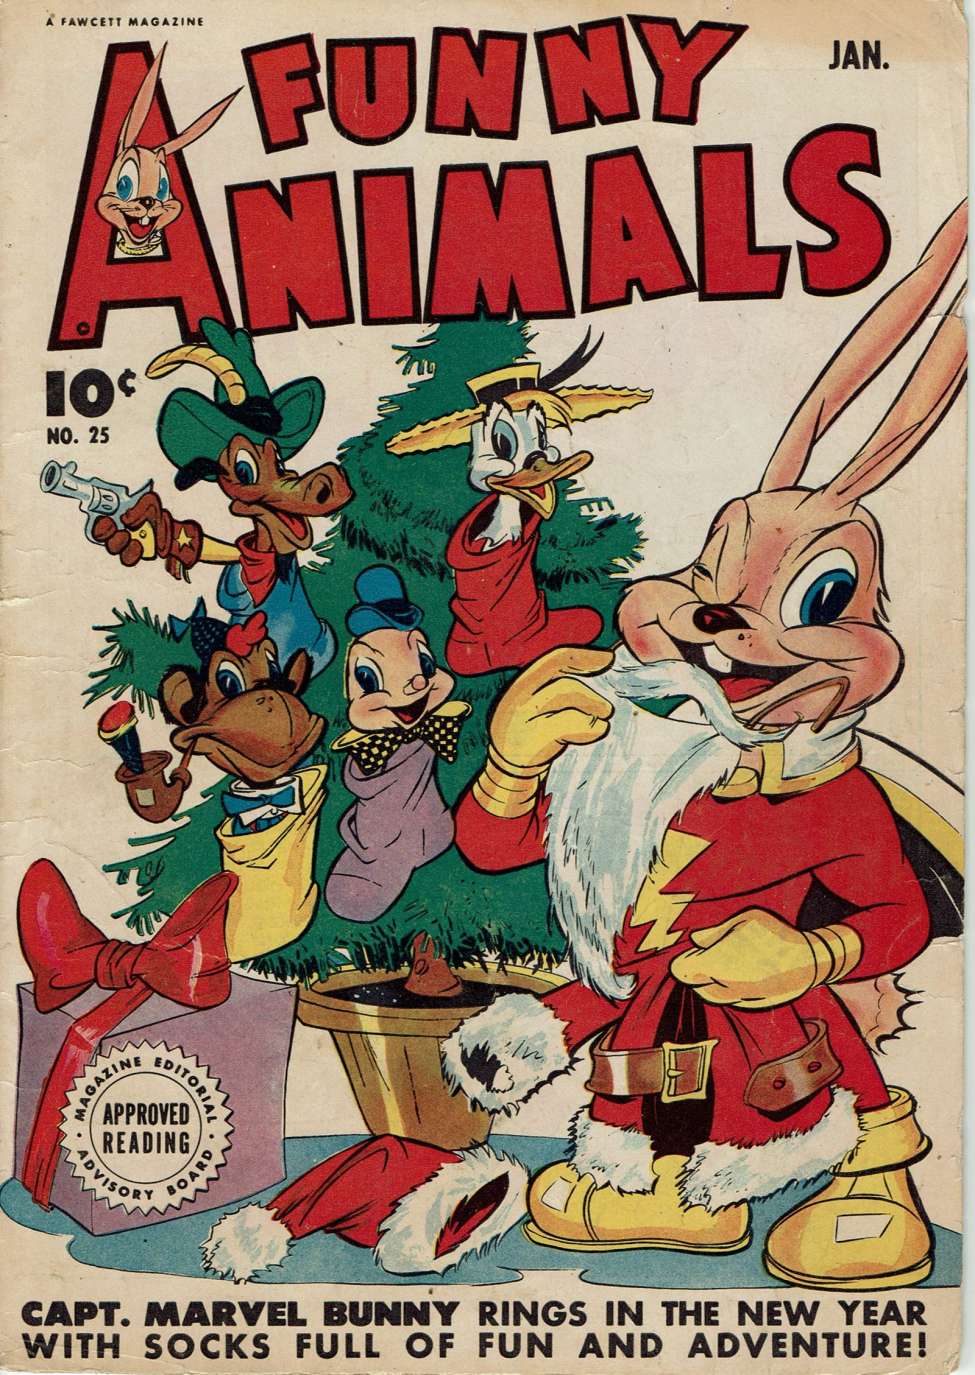 Comic Book Cover For Fawcett's Funny Animals 25